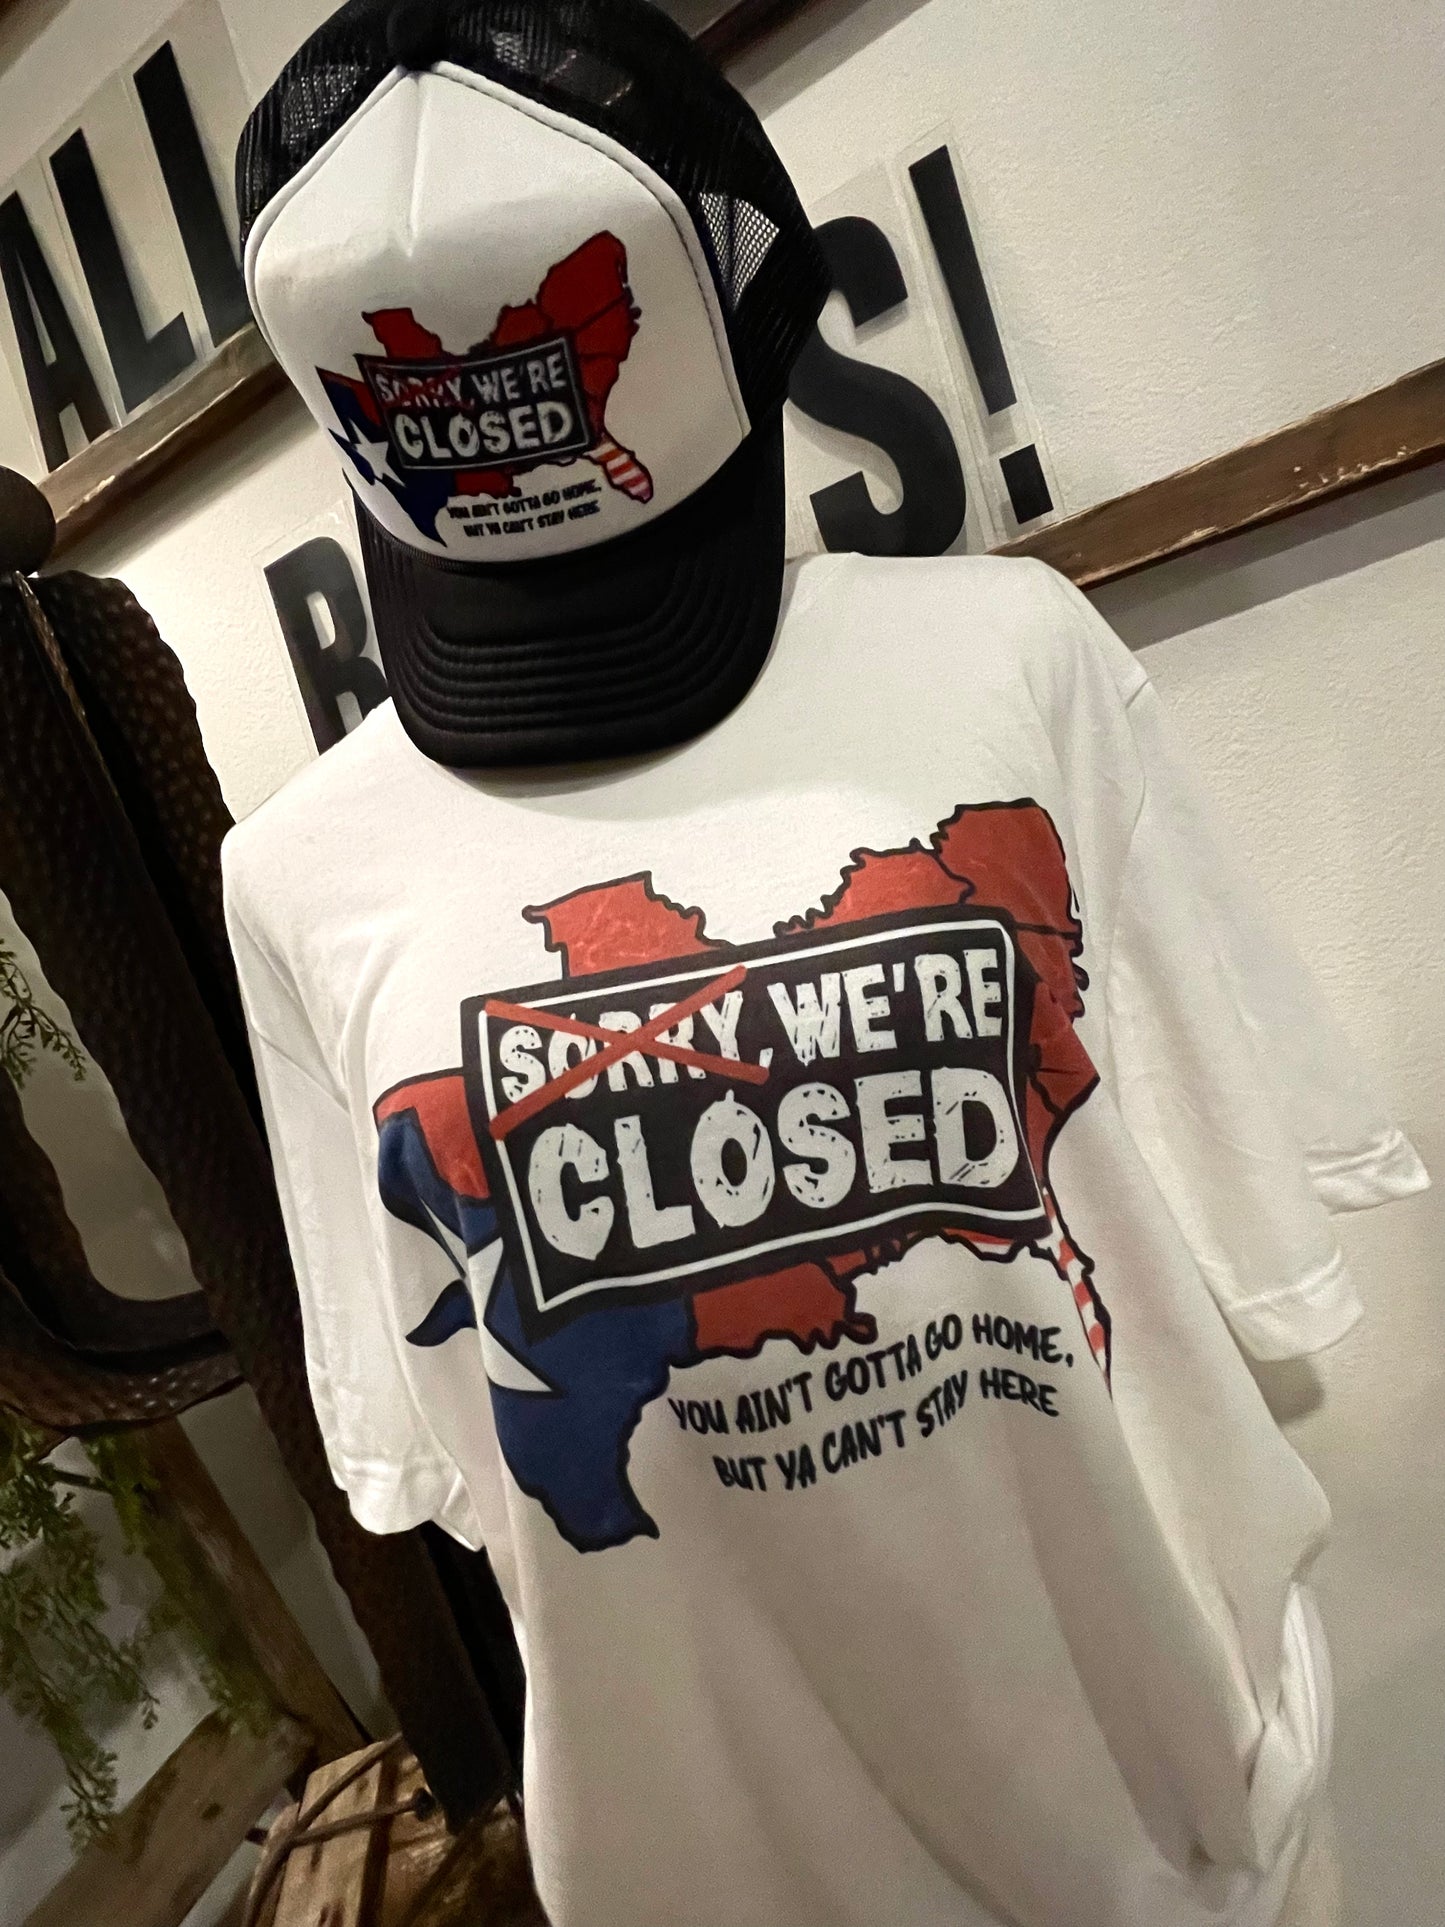 SORRY WE’RE CLOSED HAT